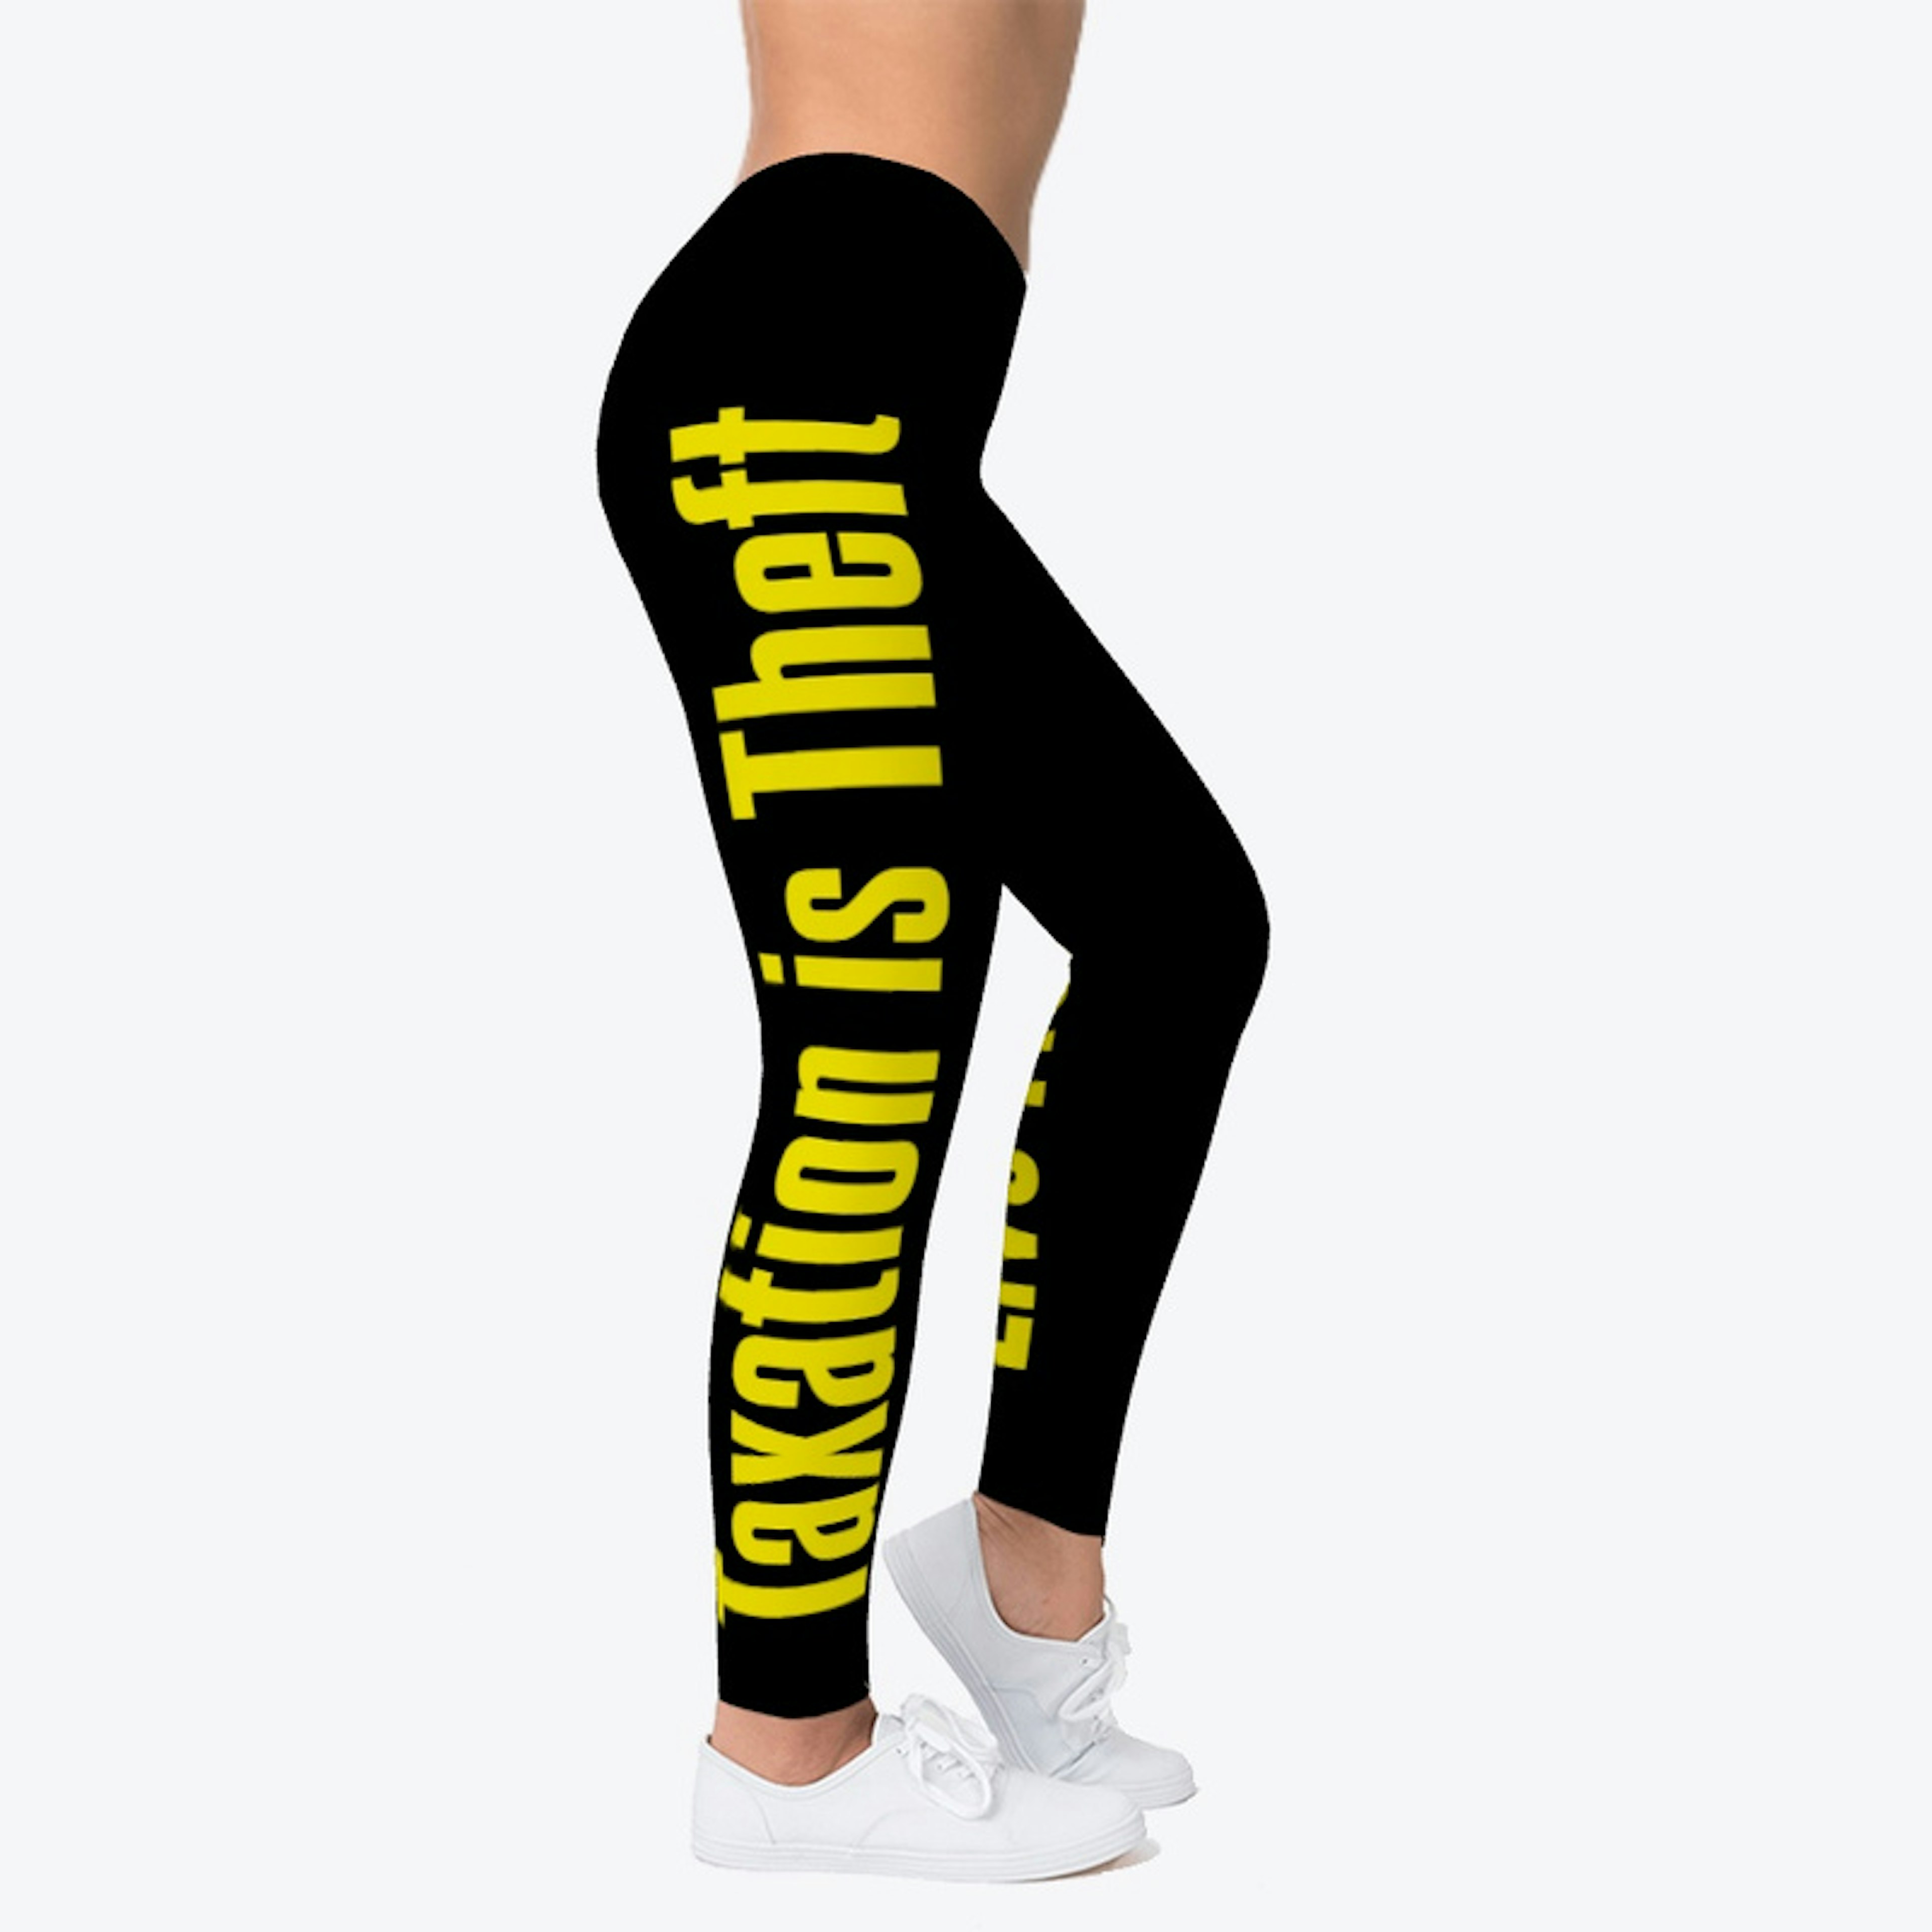 Taxation is Theft/Live Free Leggings